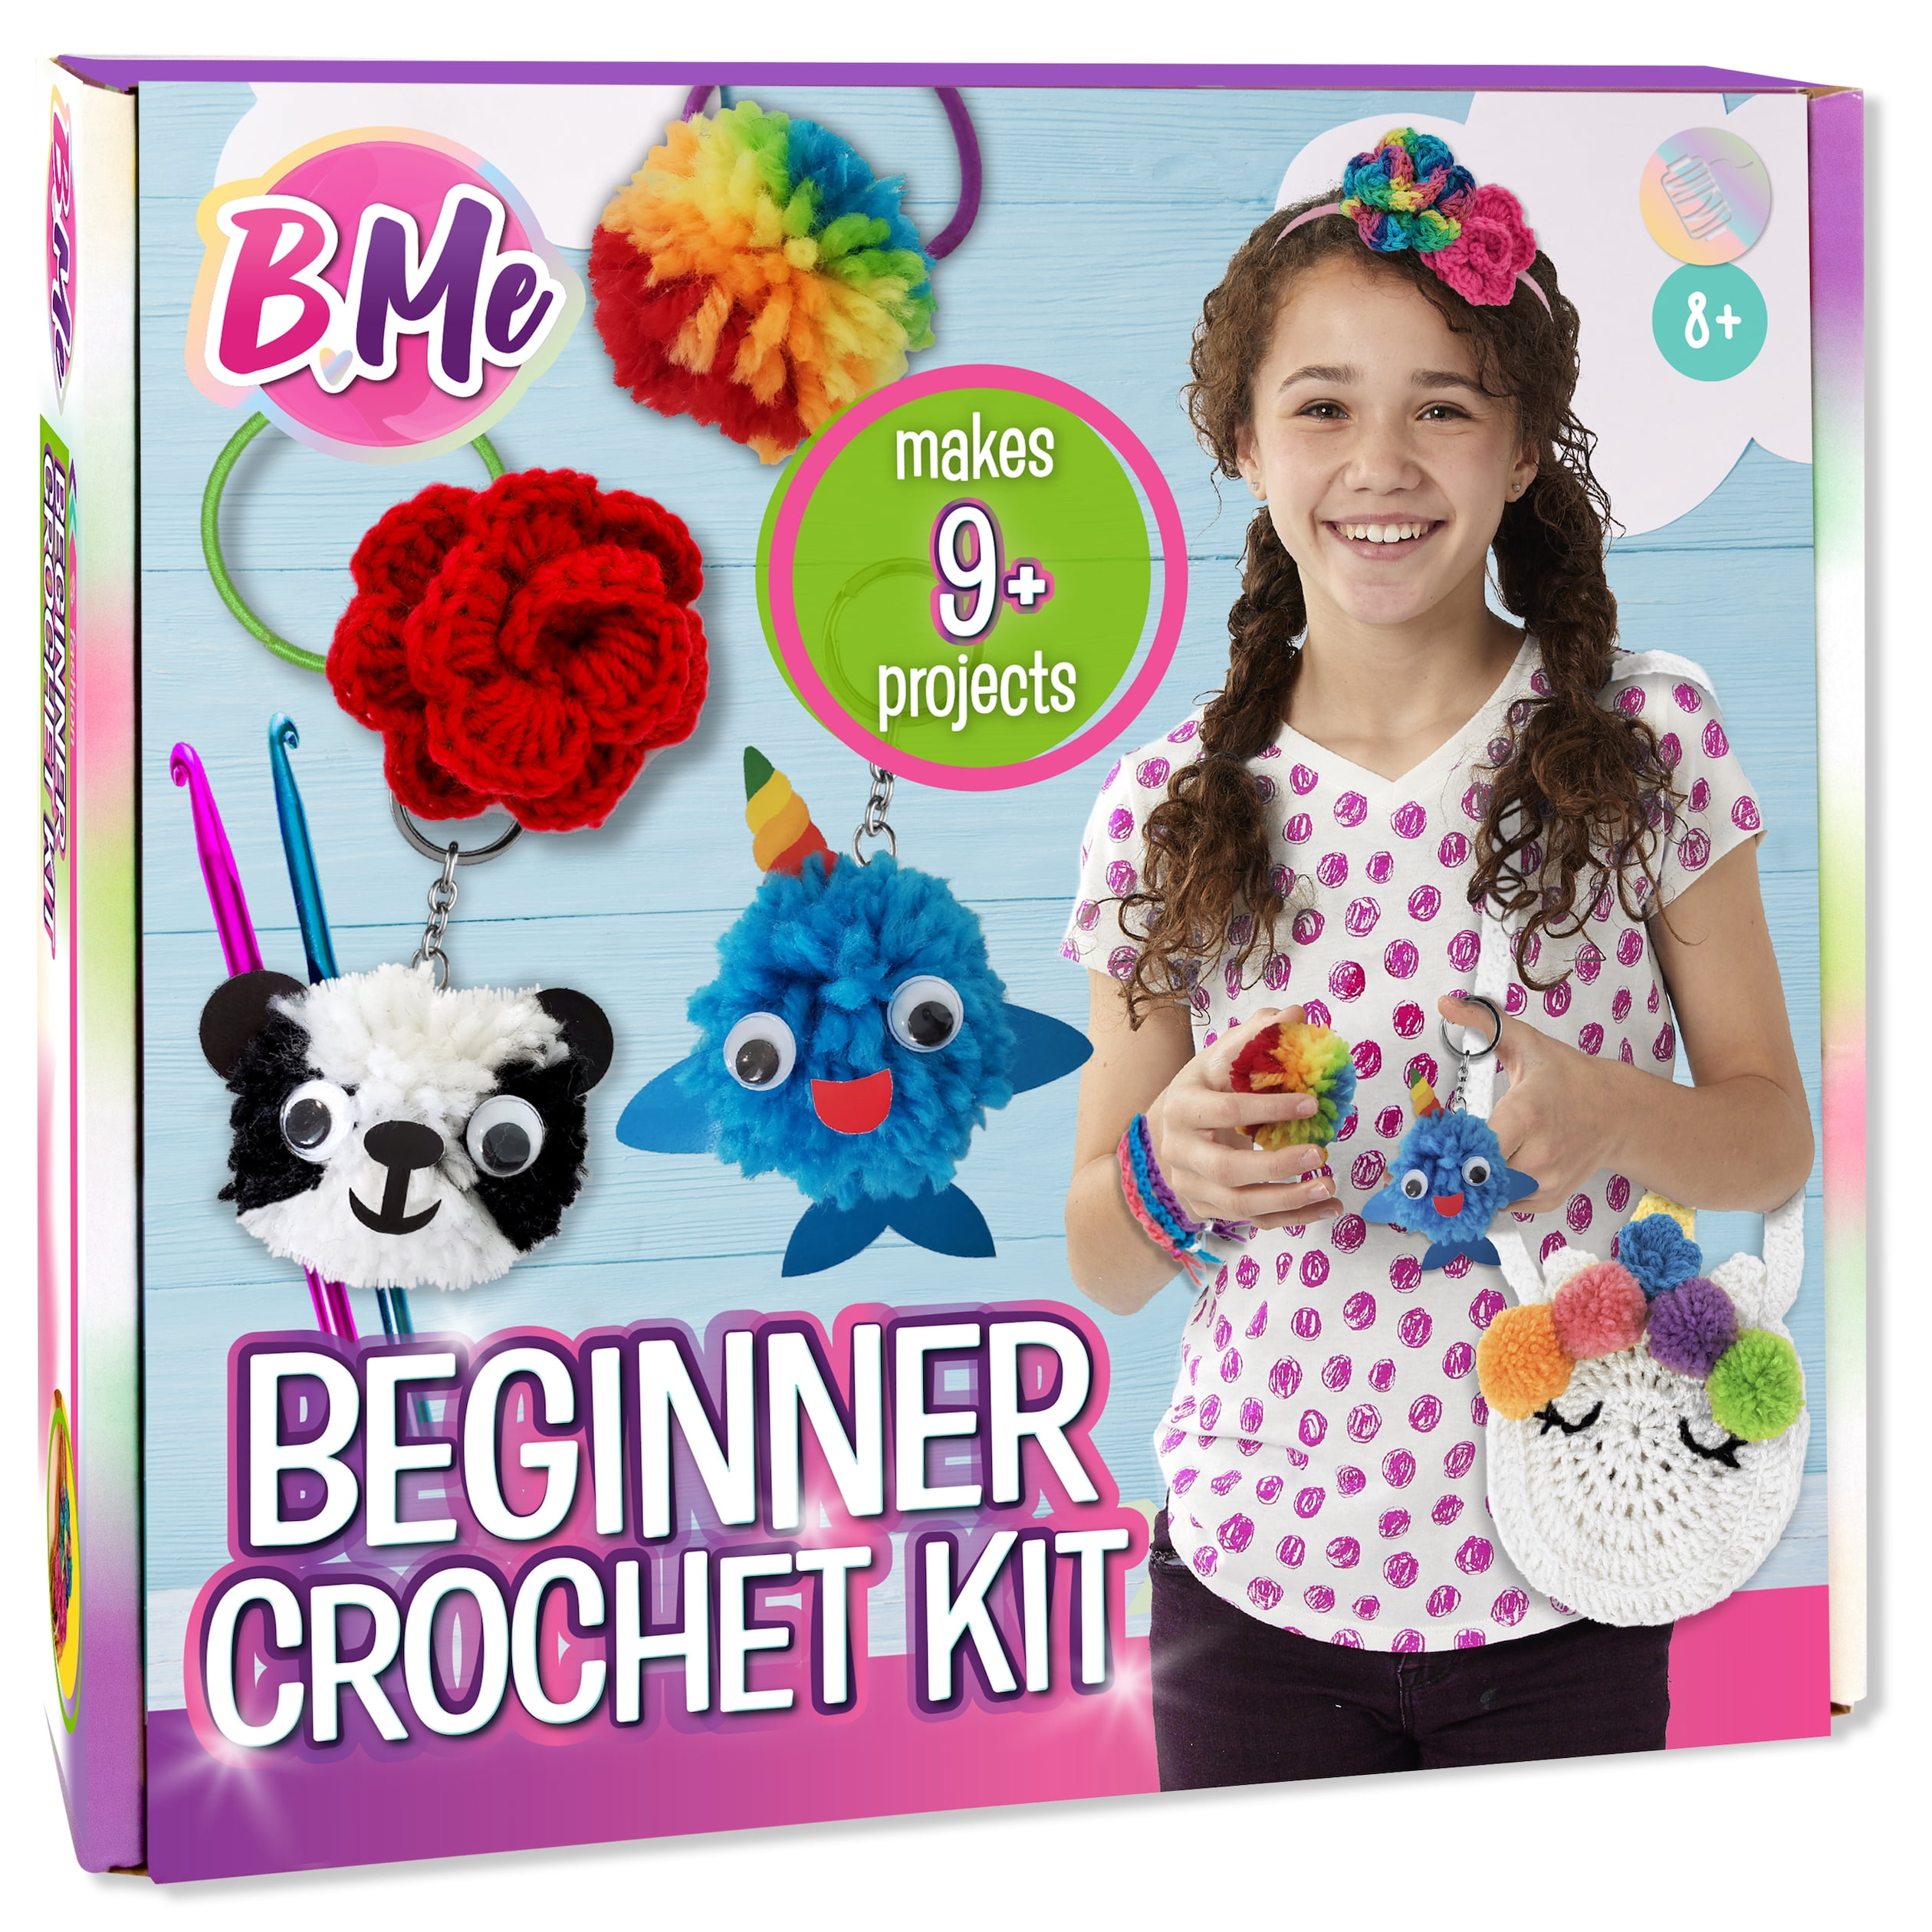 The colorful box packaging of the Creative Kids Beginner Crochet Kit features a girl with multiple crochet creations in the form of pom poms, animals, and flowers.